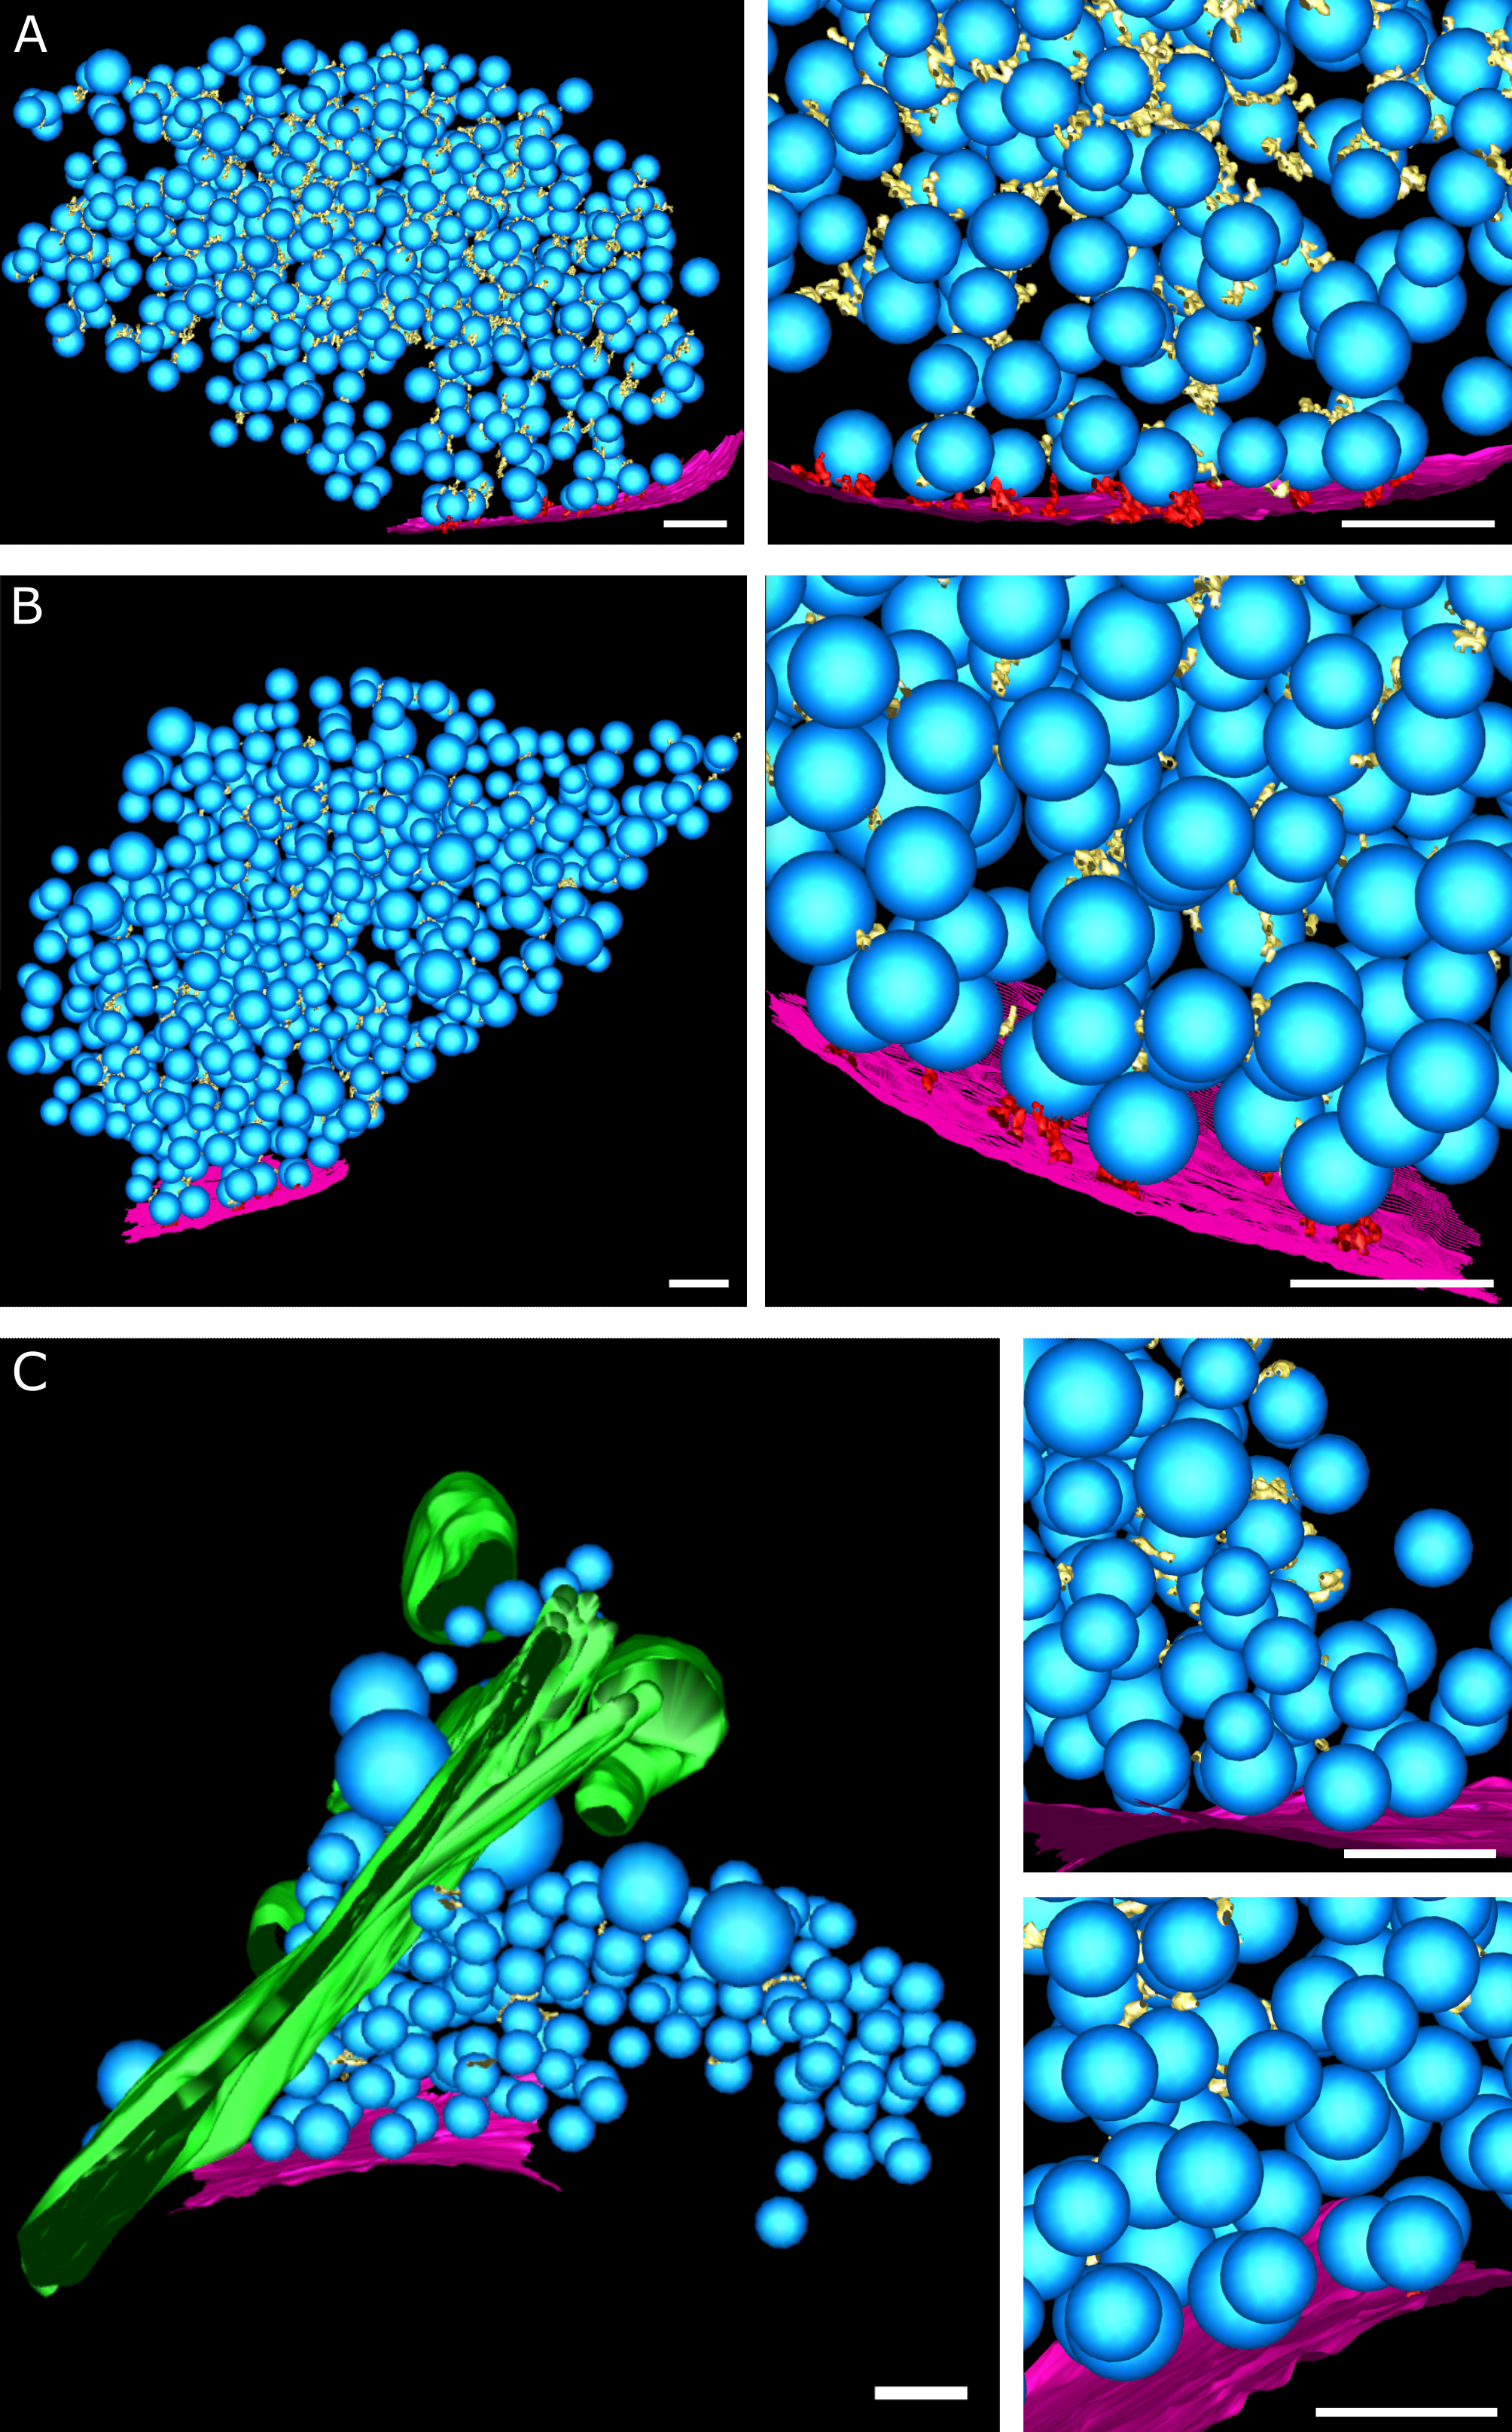 Figure EV2: 3-D rendered segmented tomograms of neuron synapses. (A-C) (A) SNAP-25 WT, (B) SNAP-25-4E, (C) SNAP-25-4K. (left) Overview, (right) detail. Blue: synaptic vesicles; purple: active zone plasma membrane; green: endoplasmic reticulum-like organelle; yellow: connectors; red: tethers. Scale bars: 100 nm.